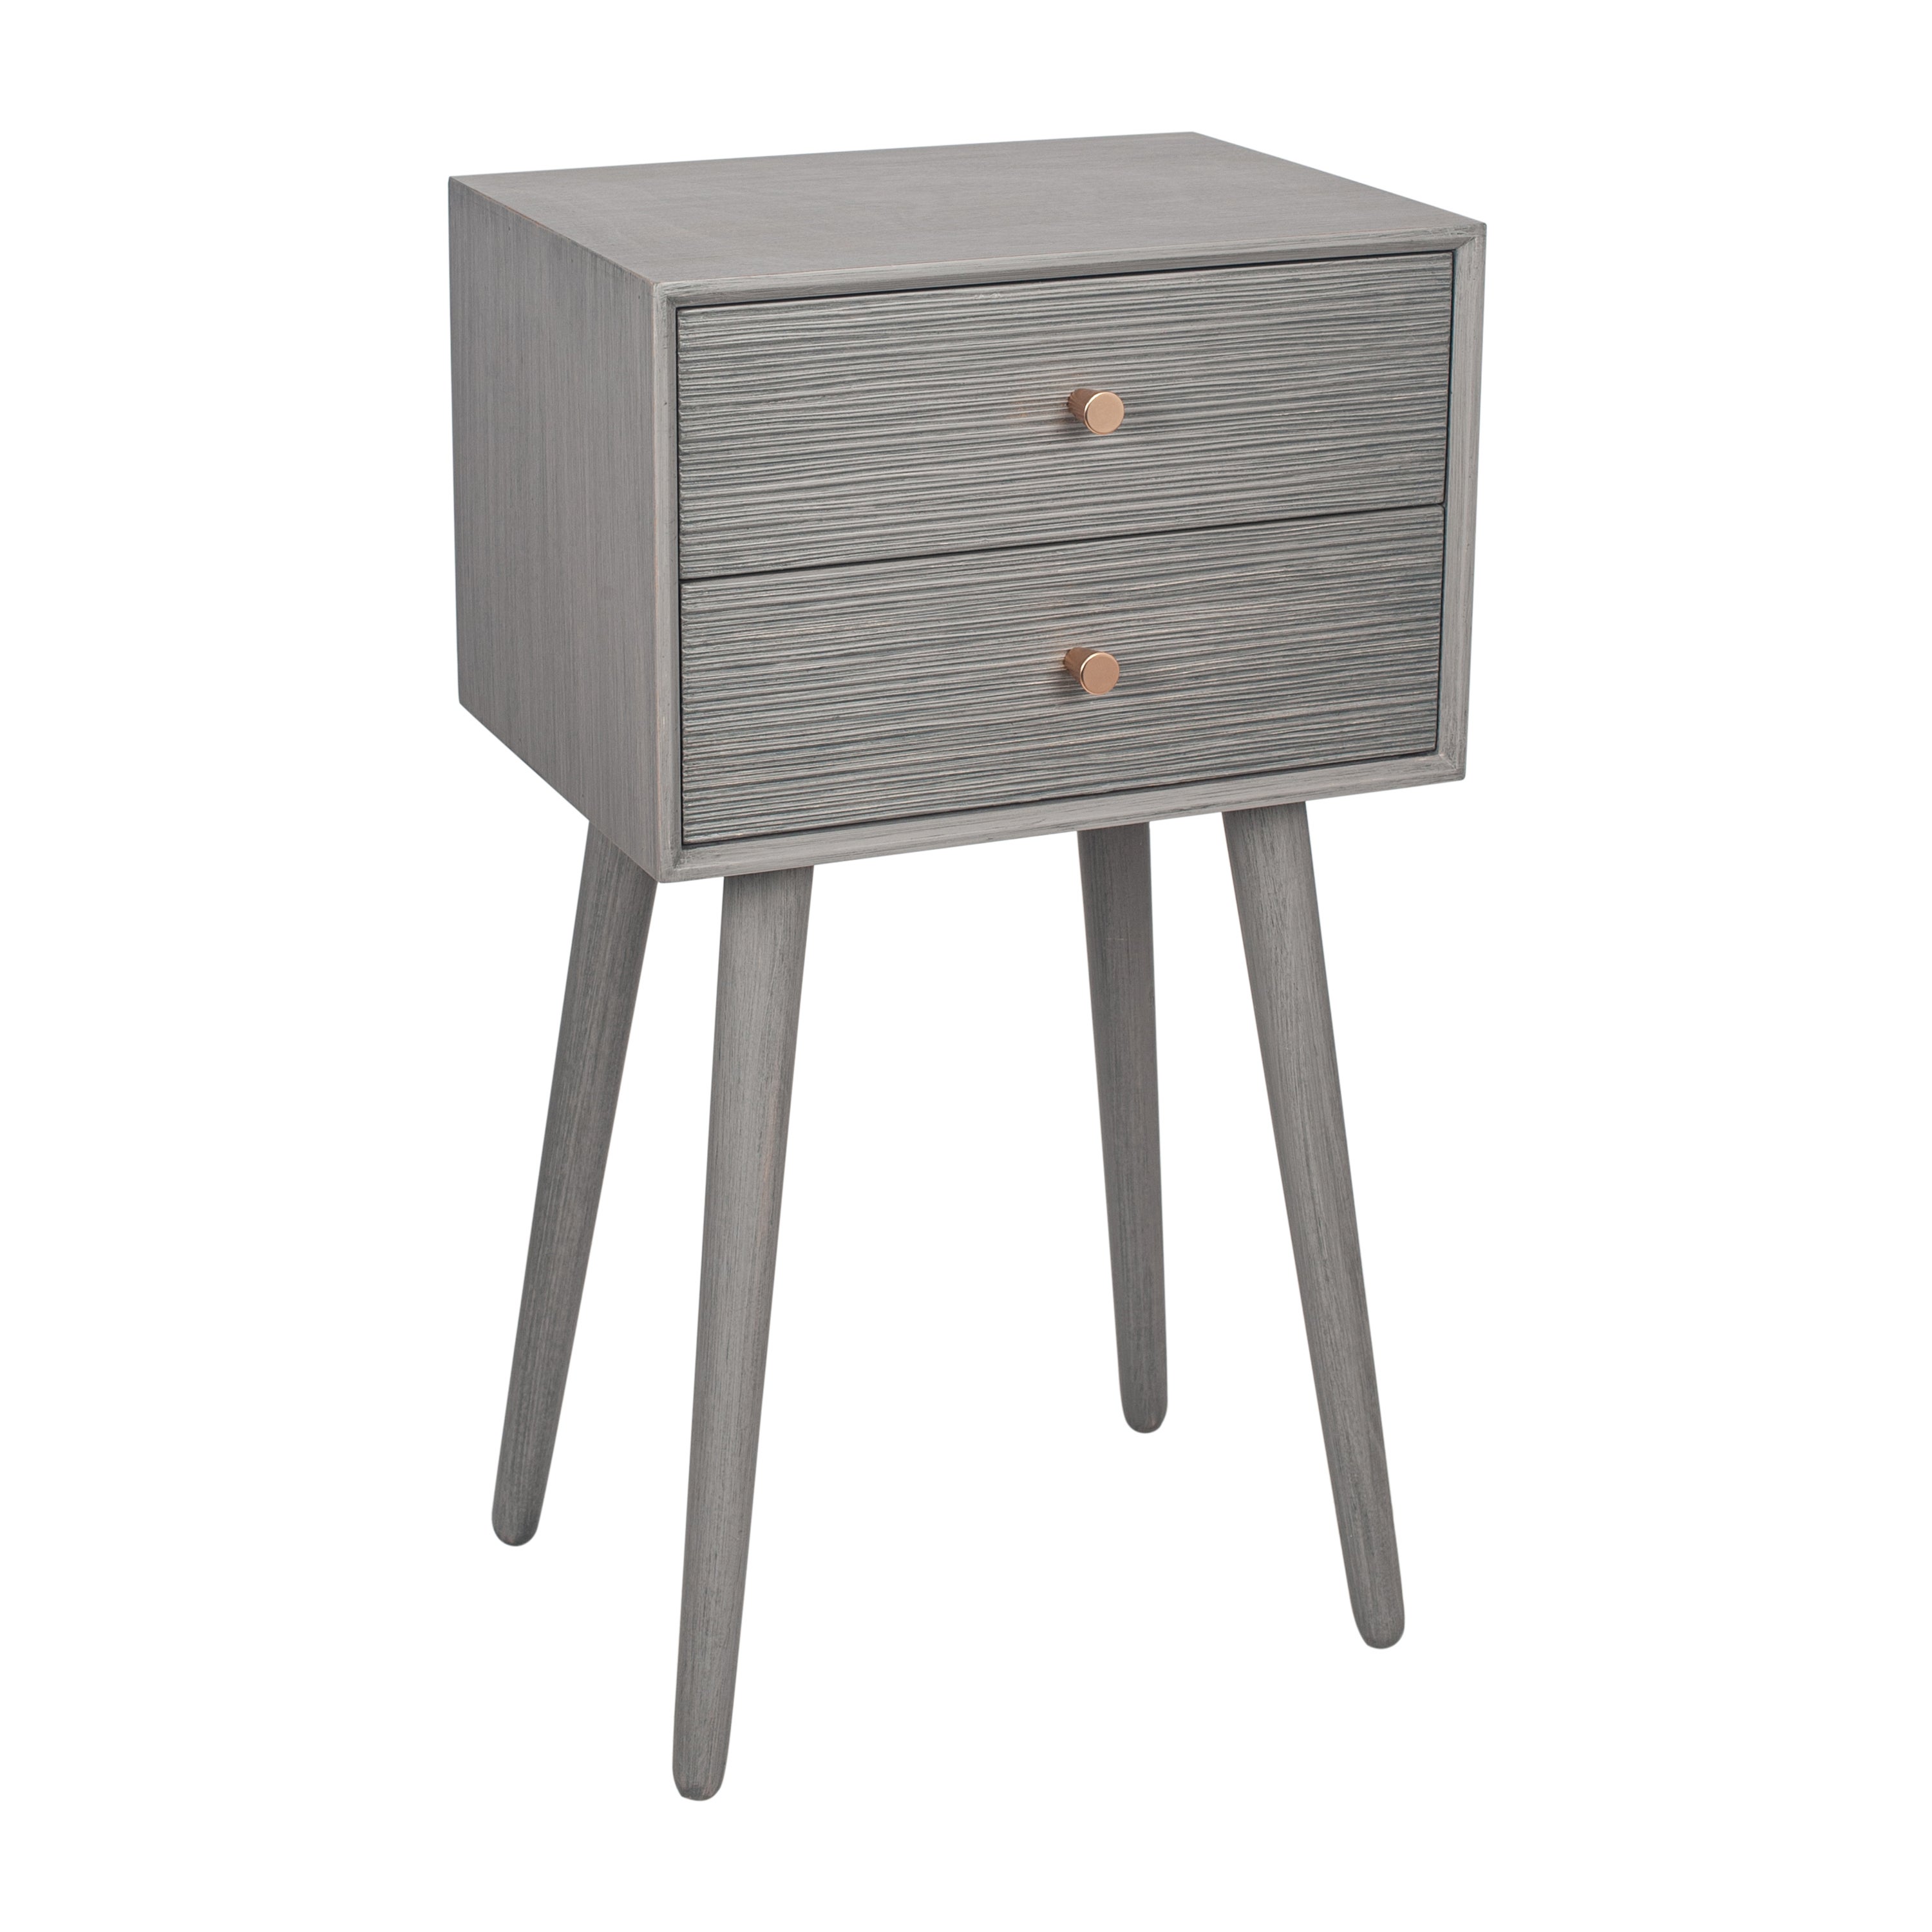 Pacific Chaya 2 Drawer Bedside Table, Grey Pine | Dunelm